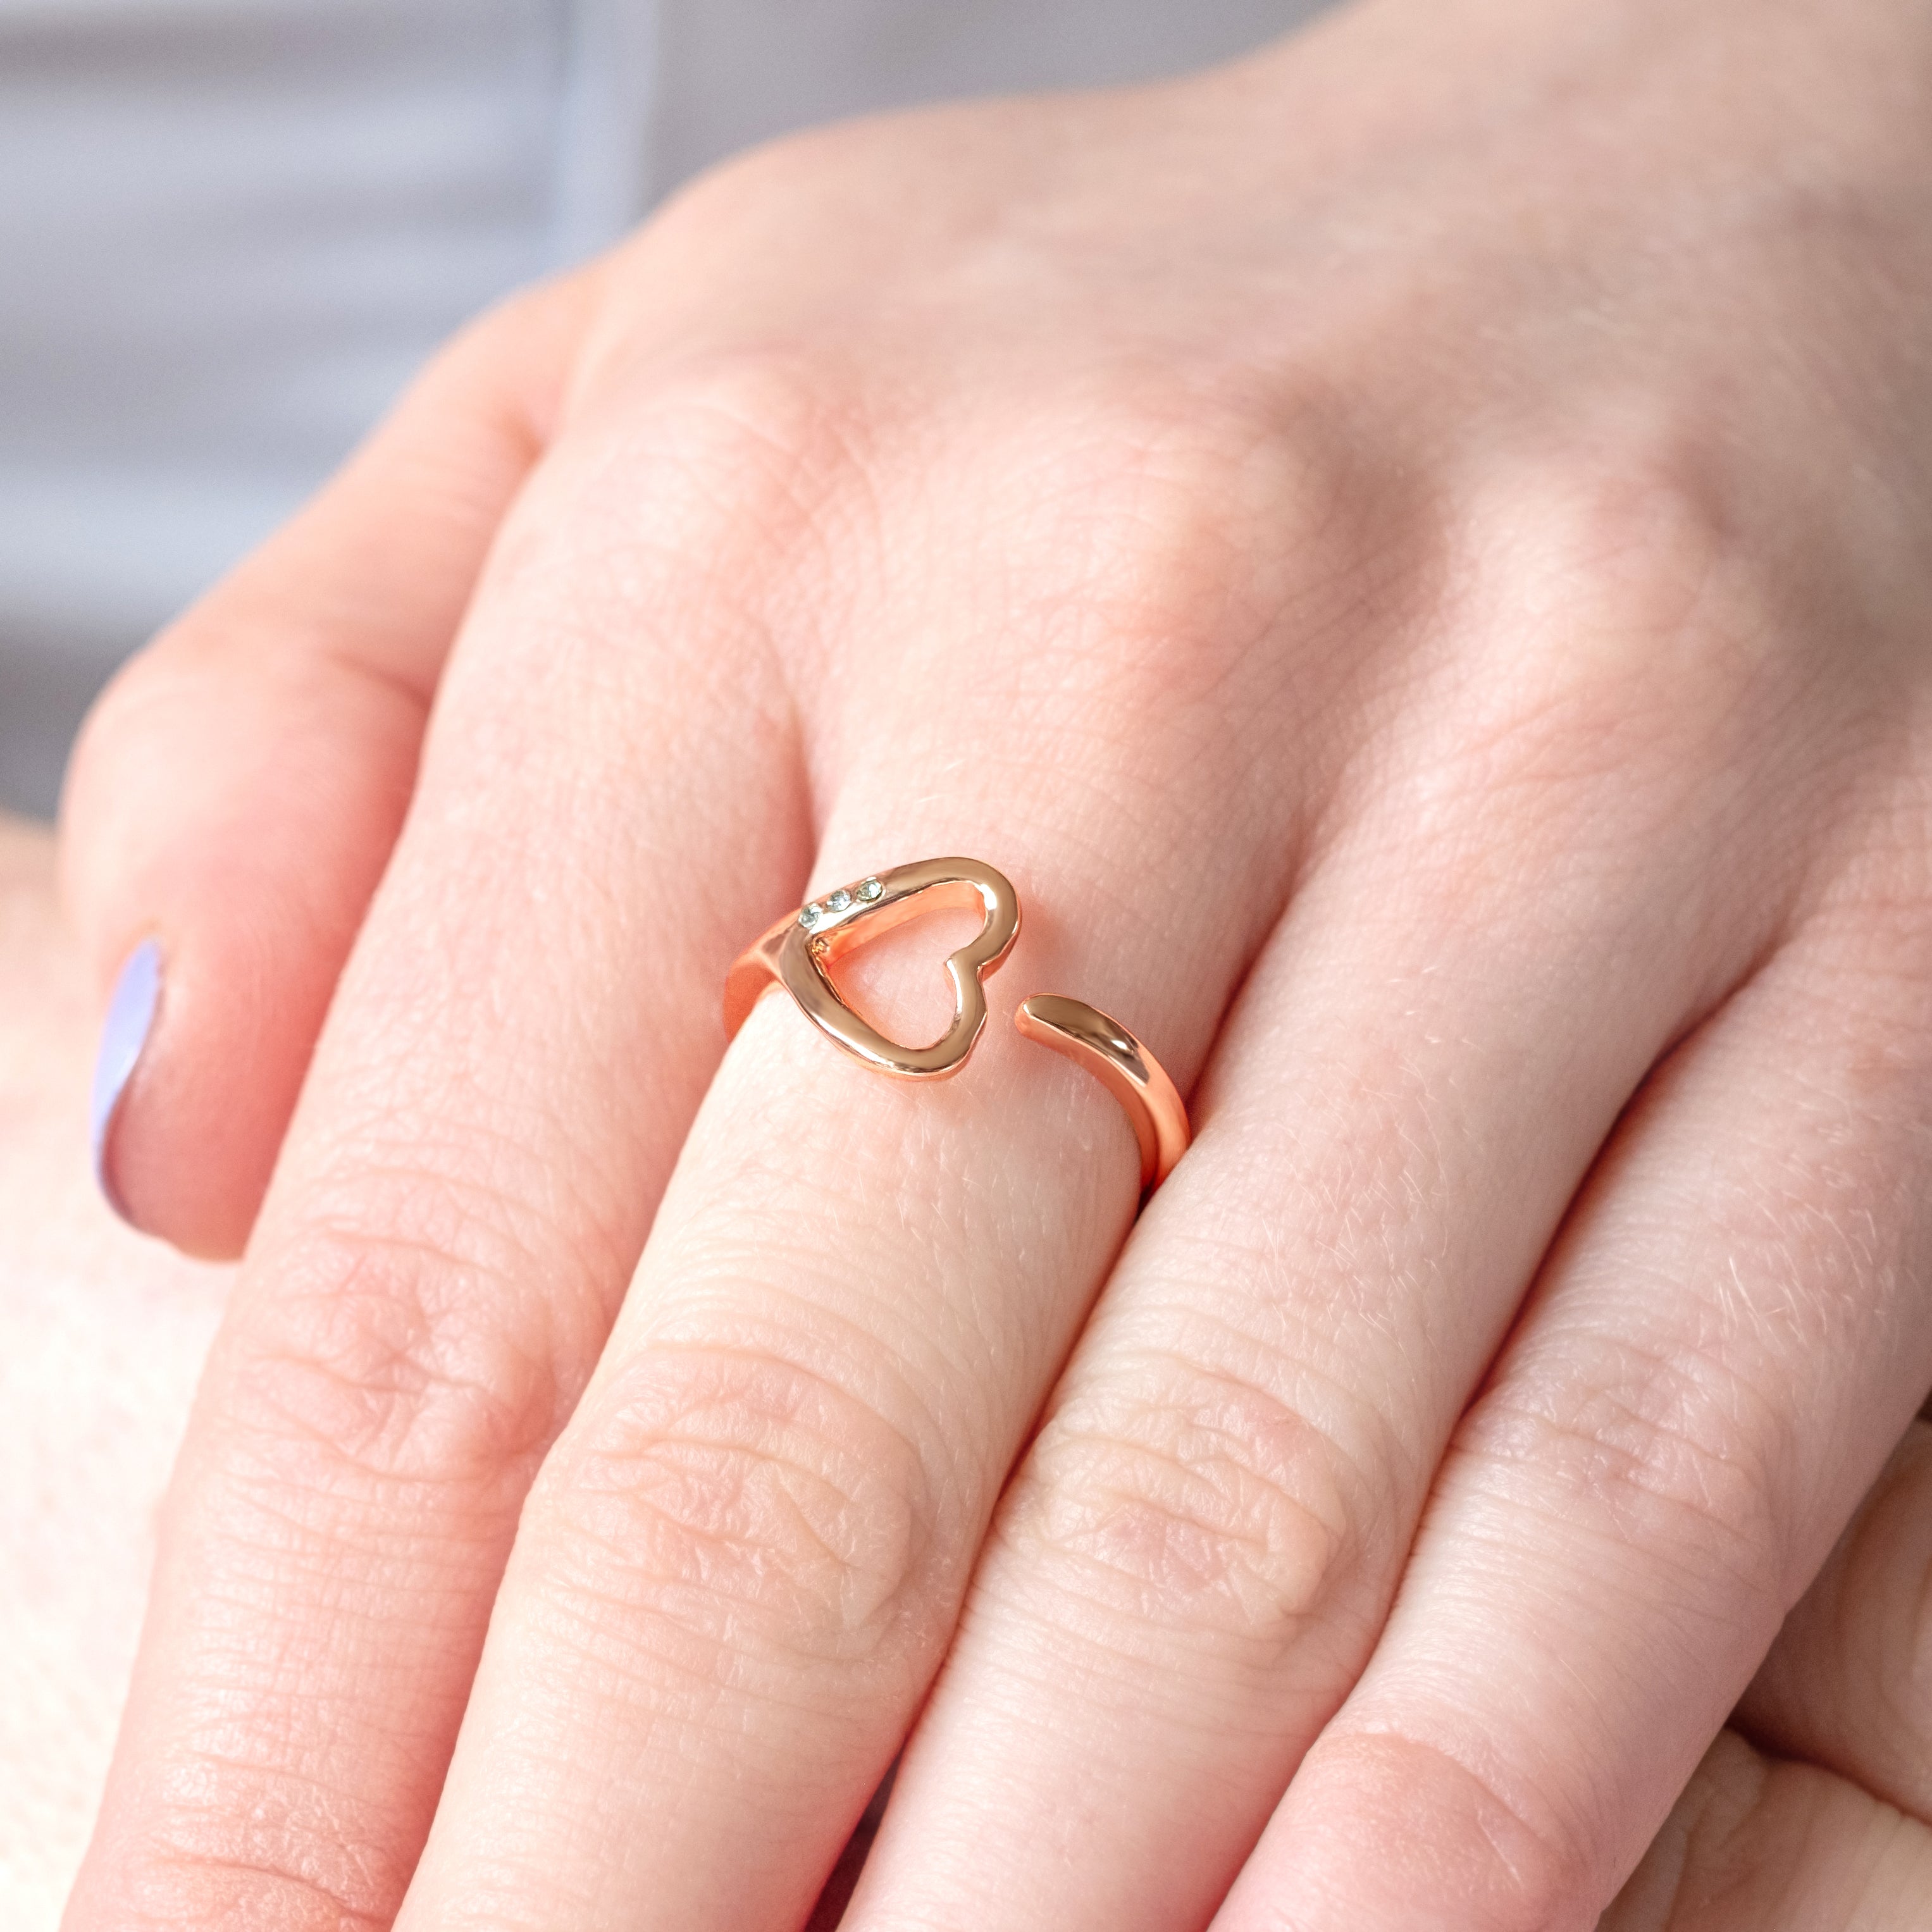 Heart Ring in Rose Gold plating size 6